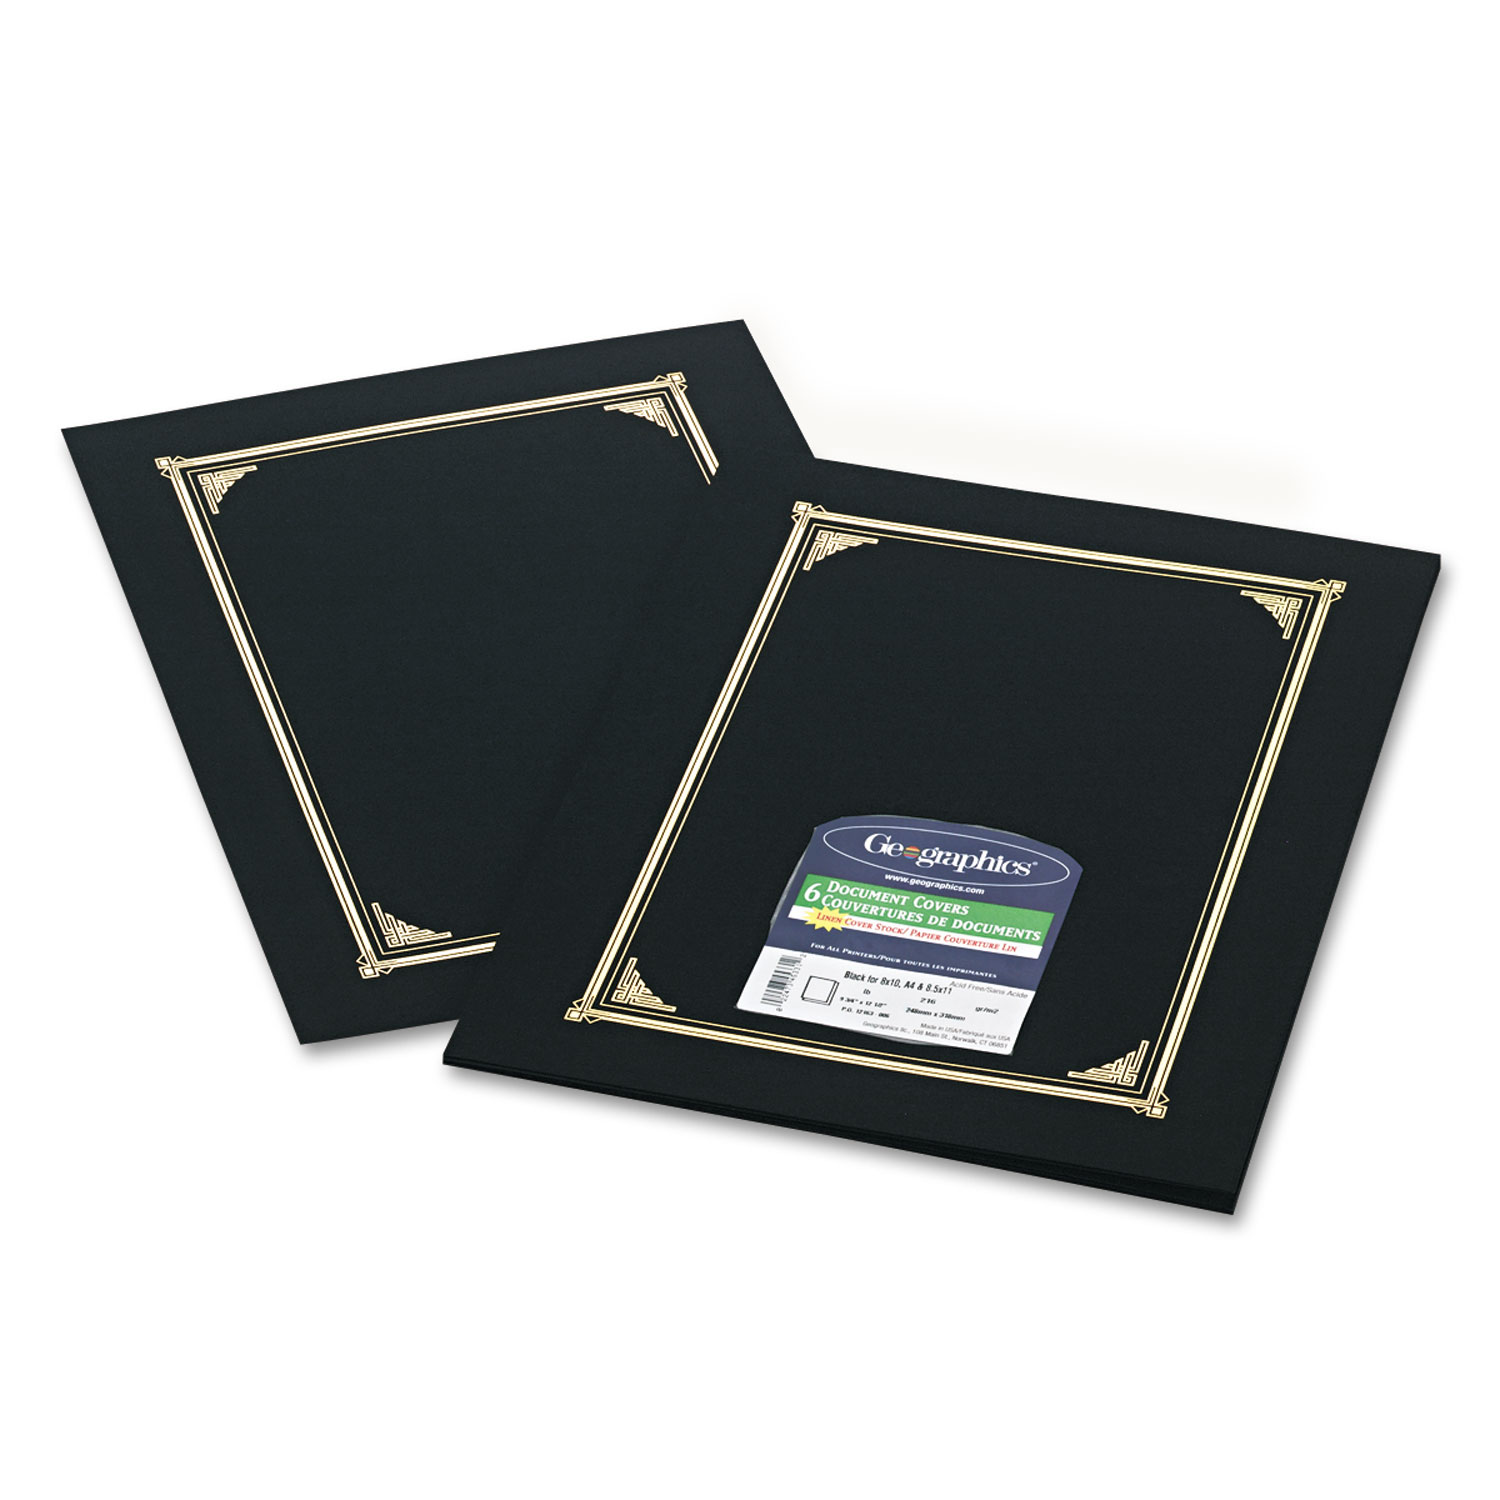 Geographics Foil Certificates 8 12 x 11 Gold Flourish Pack Of 12